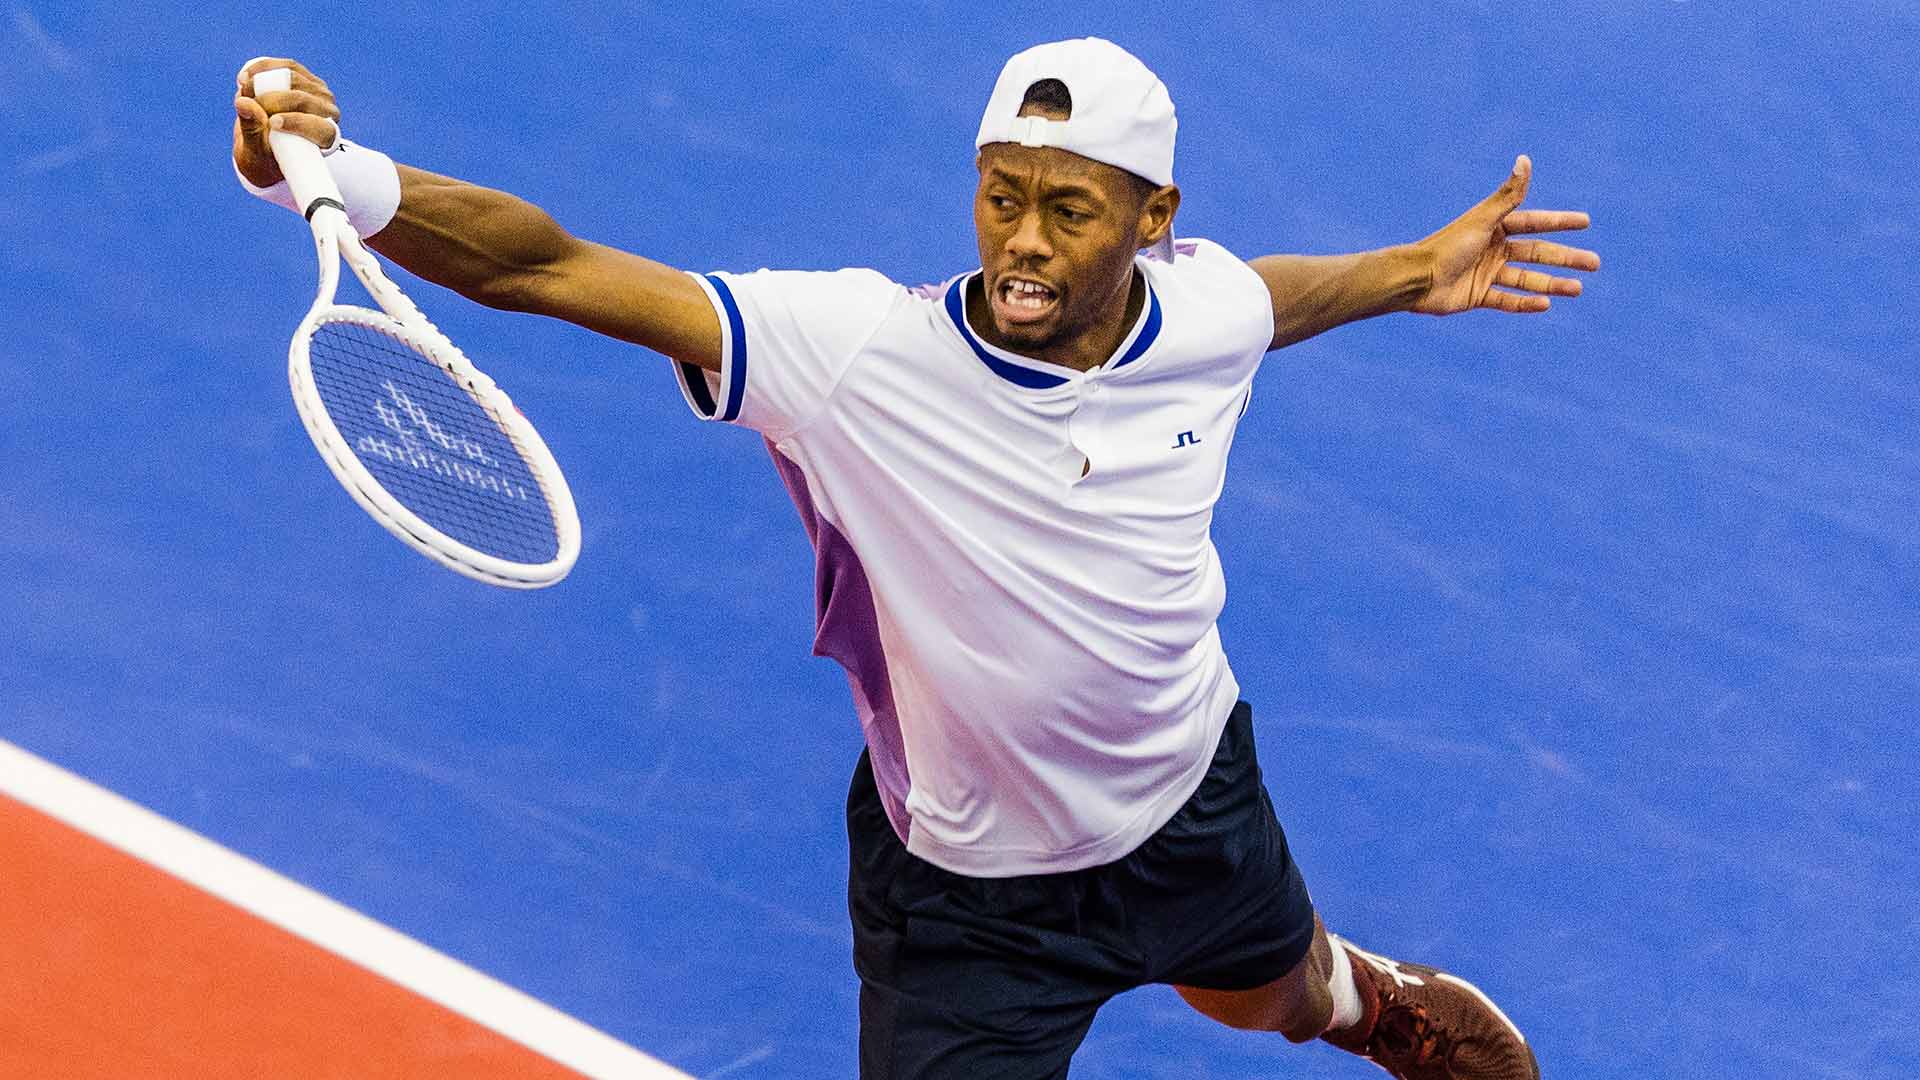 Christopher Eubanks makes a winning start at the Dallas Open.